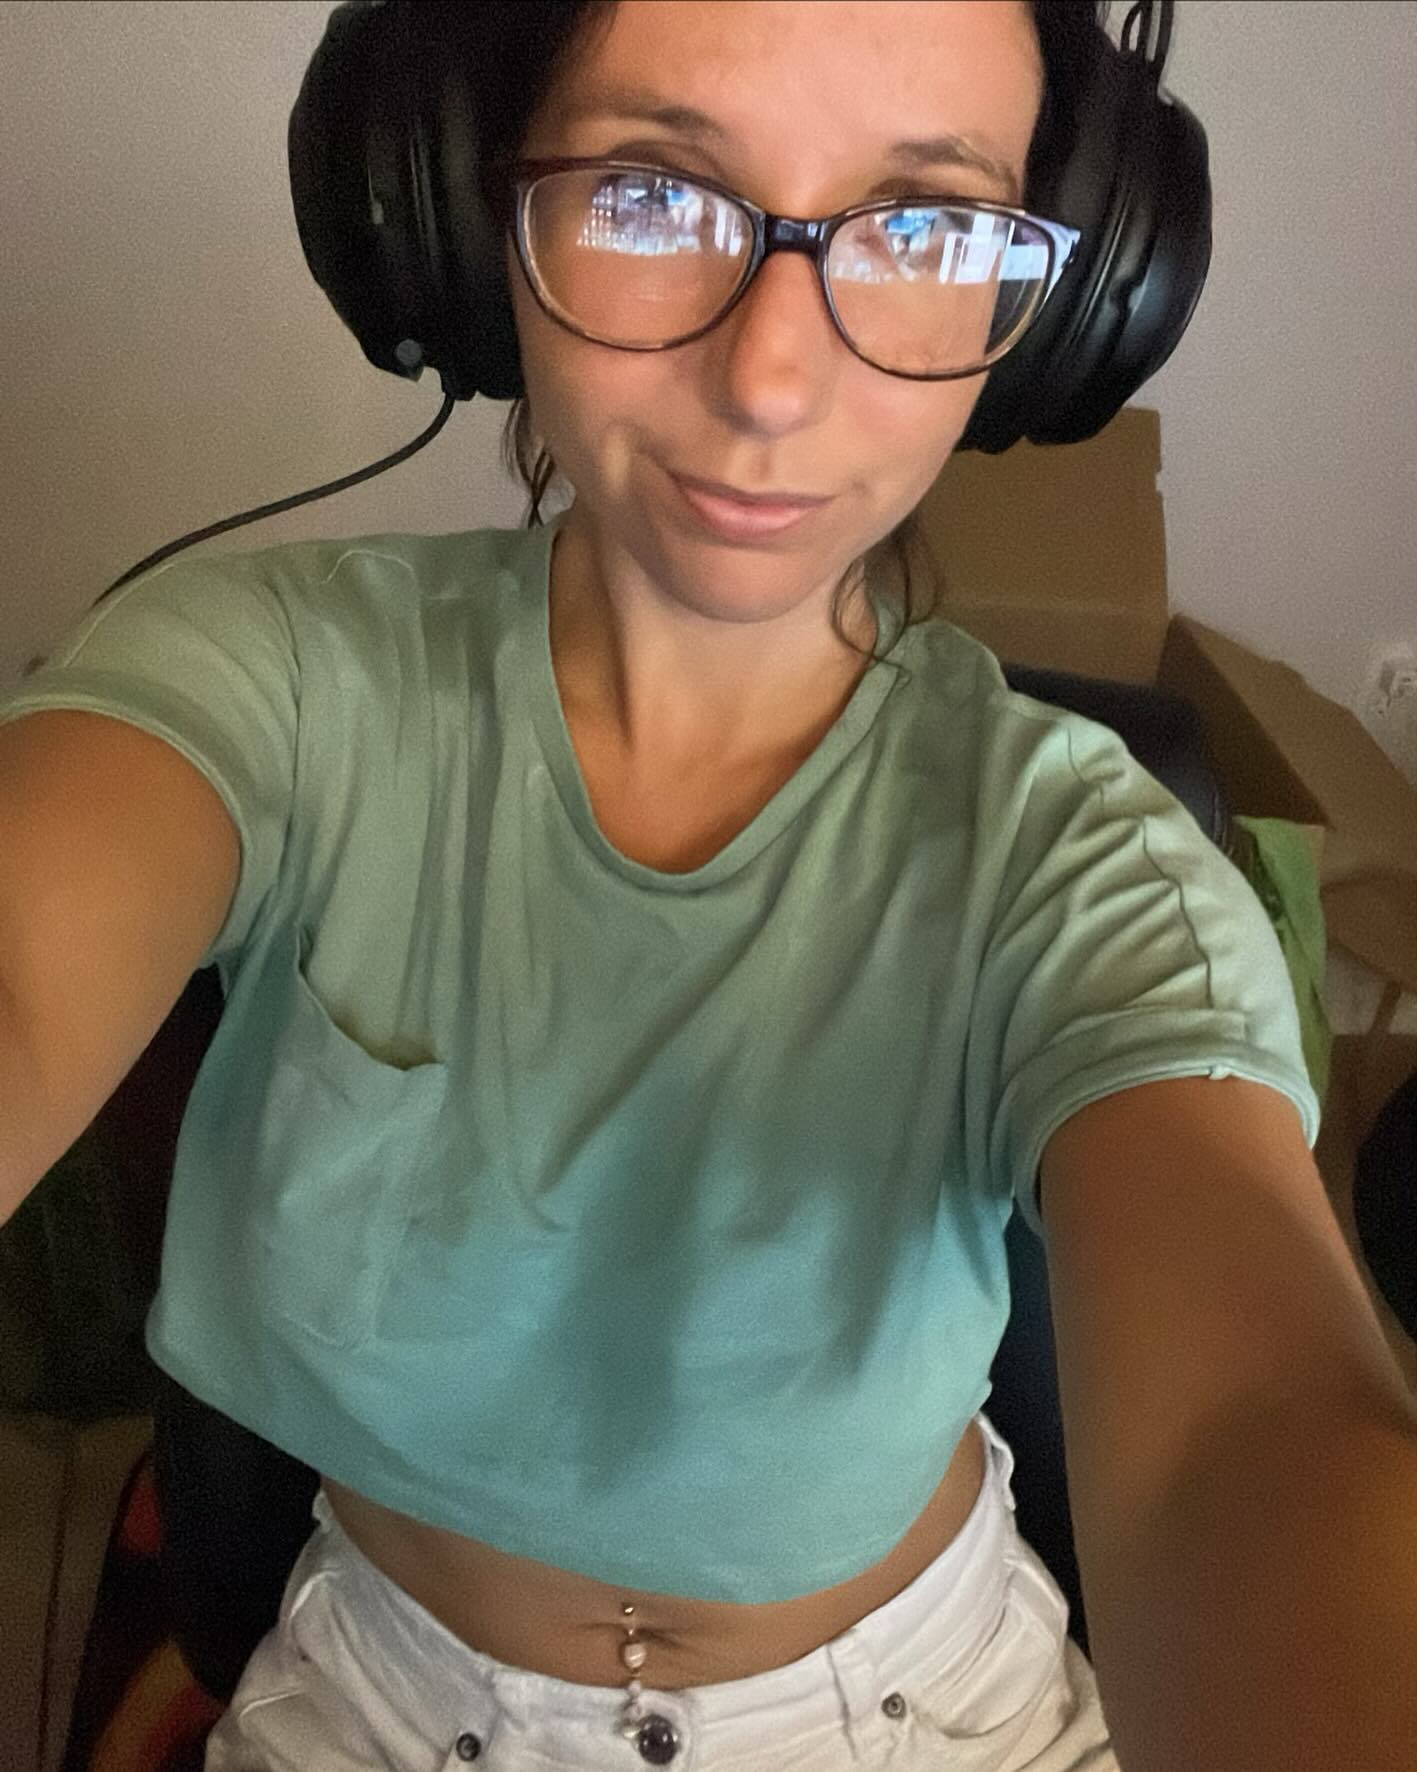 I like to think I look cute while I game, but I am genuinely addicted… it’s a problem 😅